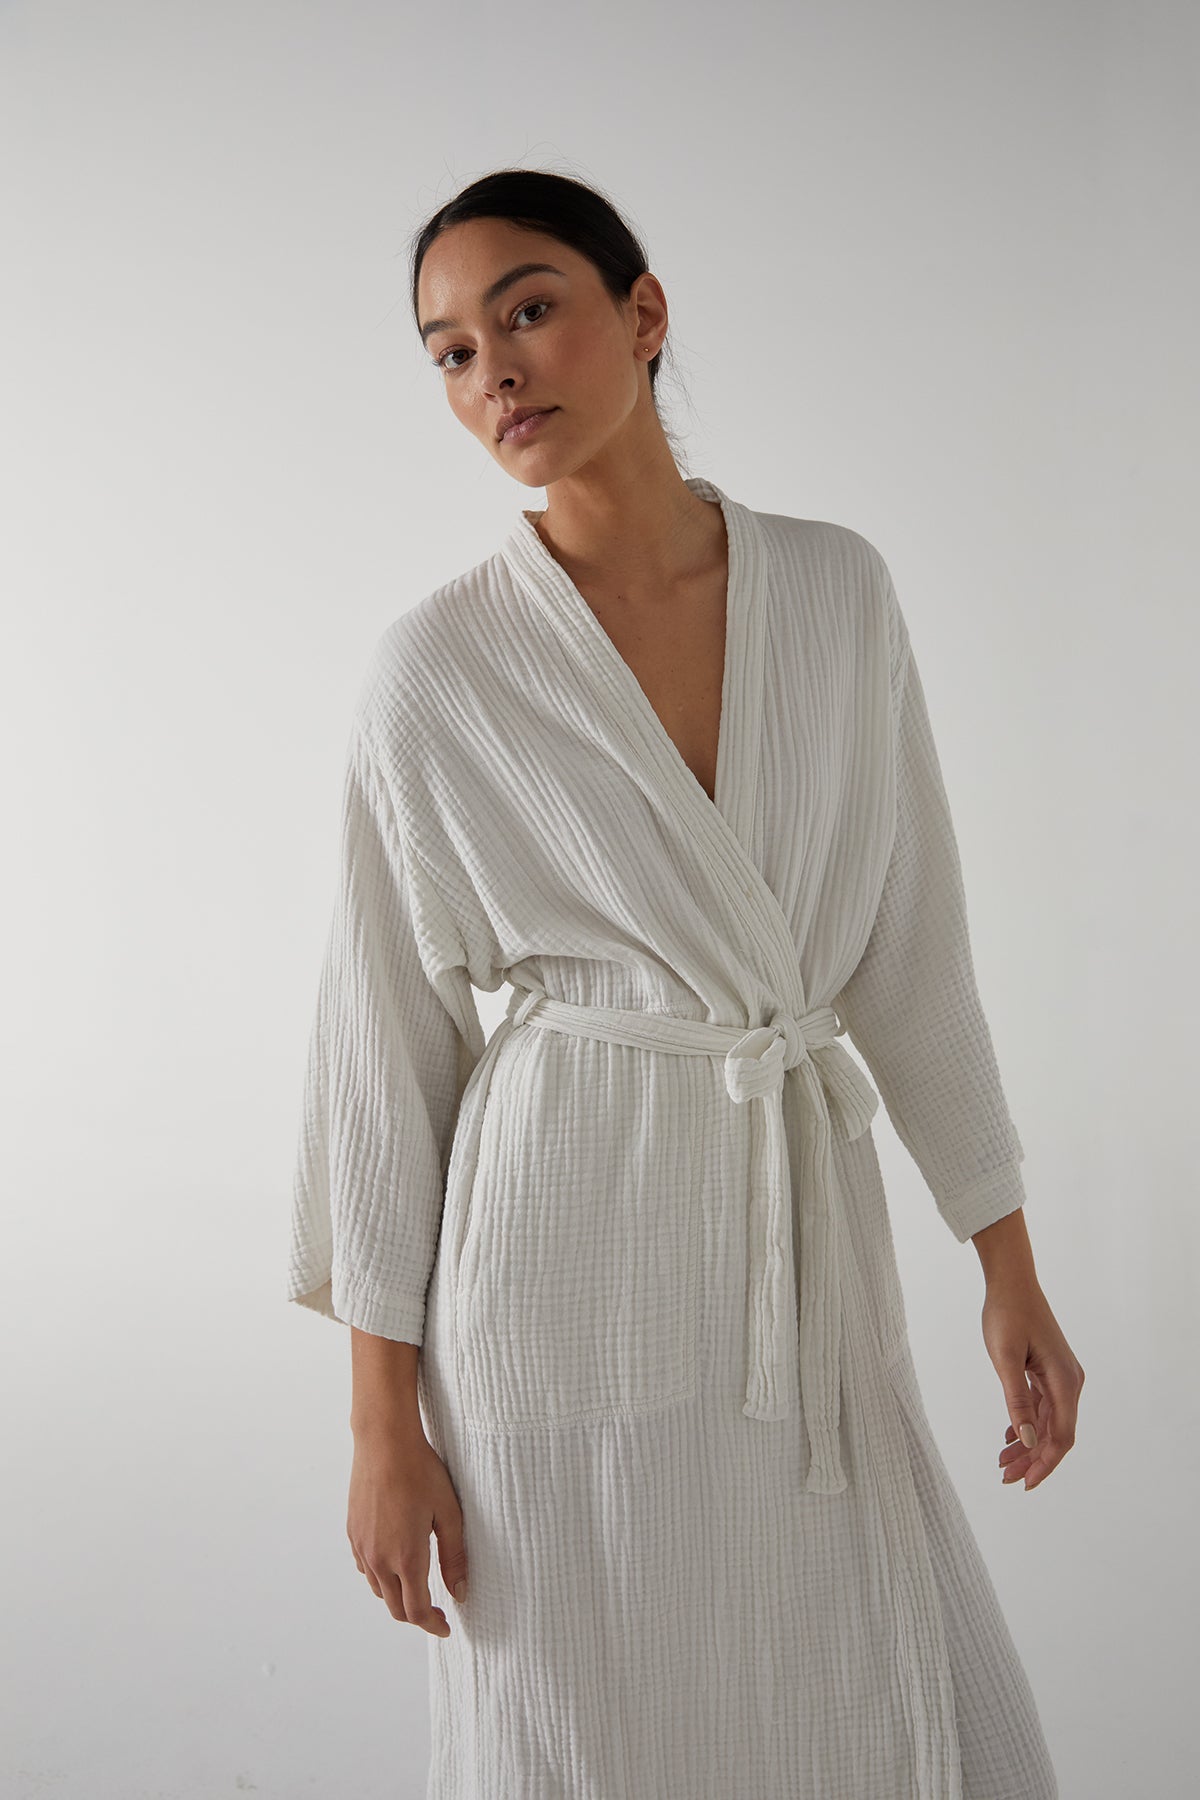 A woman wearing a Jenny Graham Home cotton gauze robe with a belt.-25520586981569